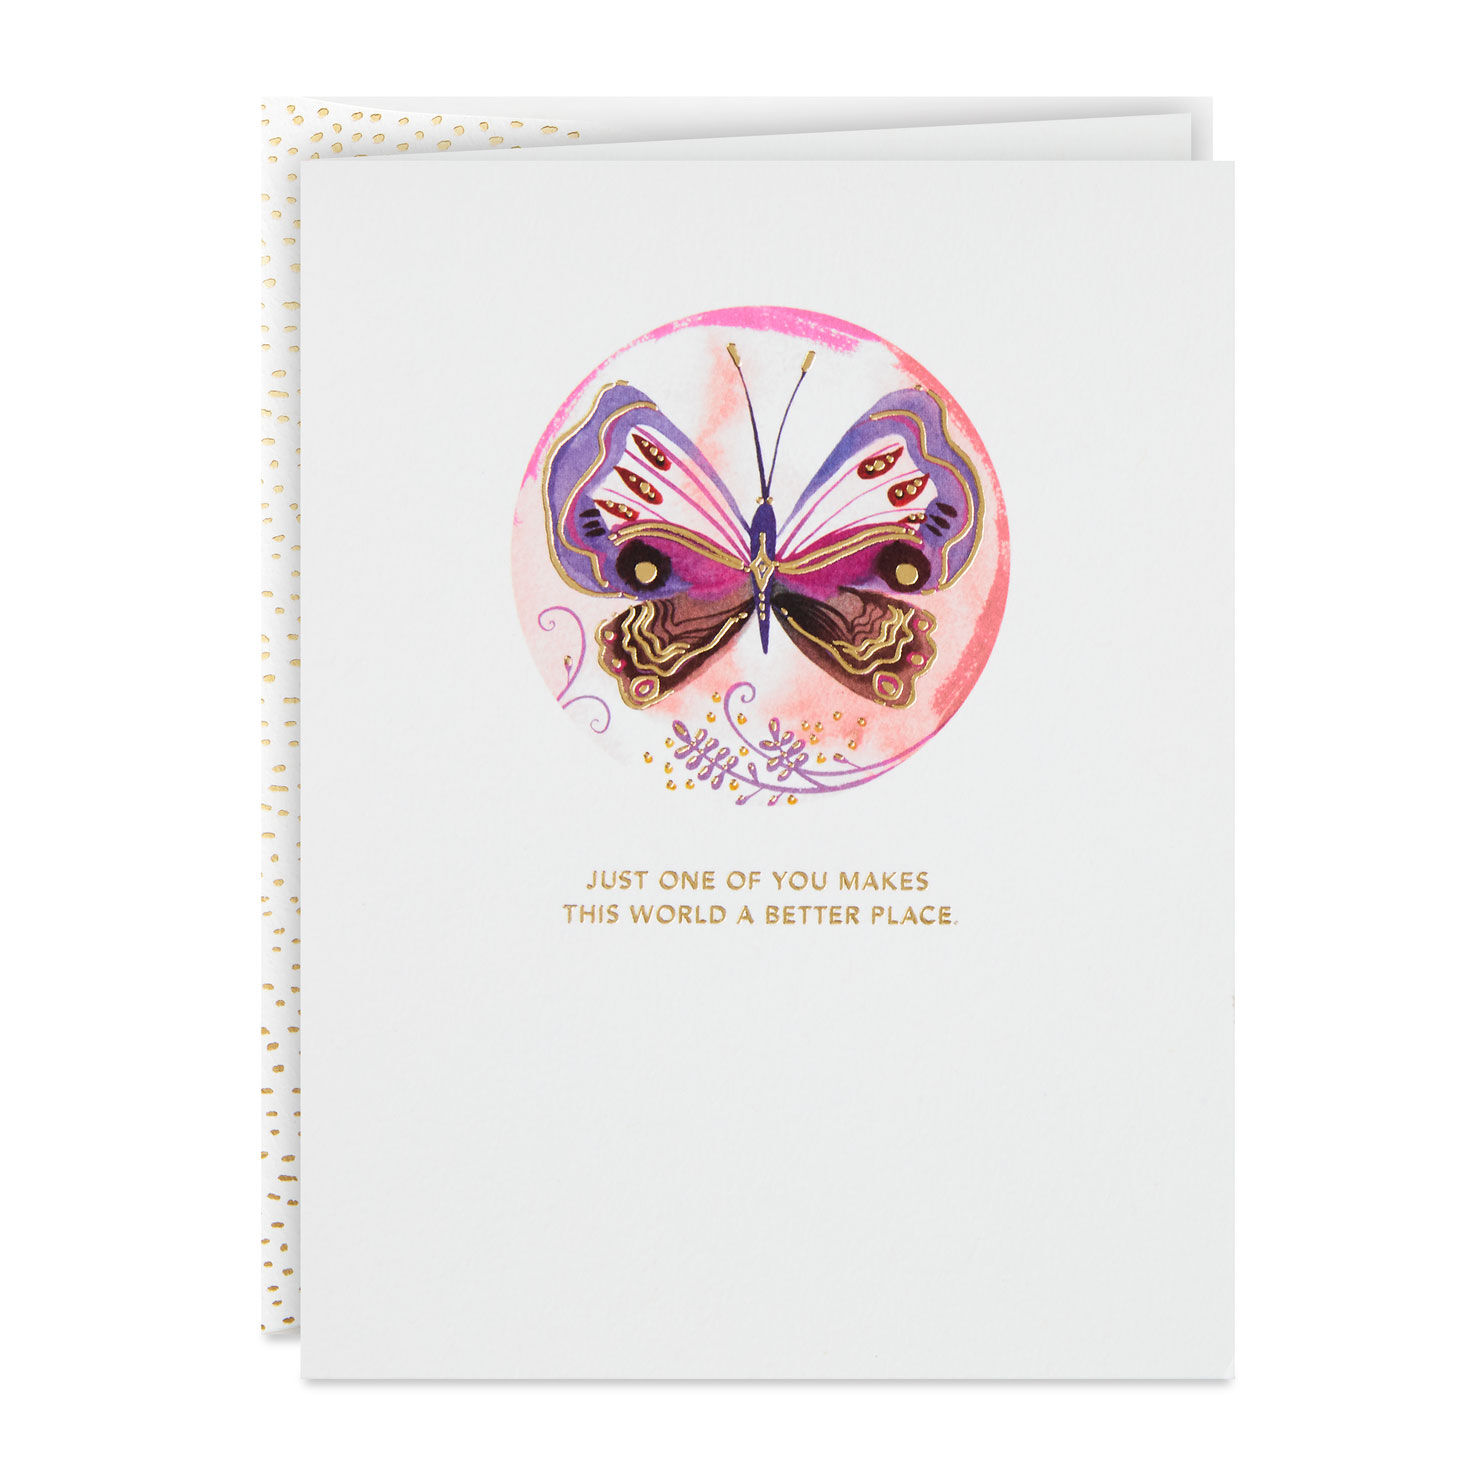 You Make This World a Better Place Birthday Card for Her for only USD 4.99 | Hallmark